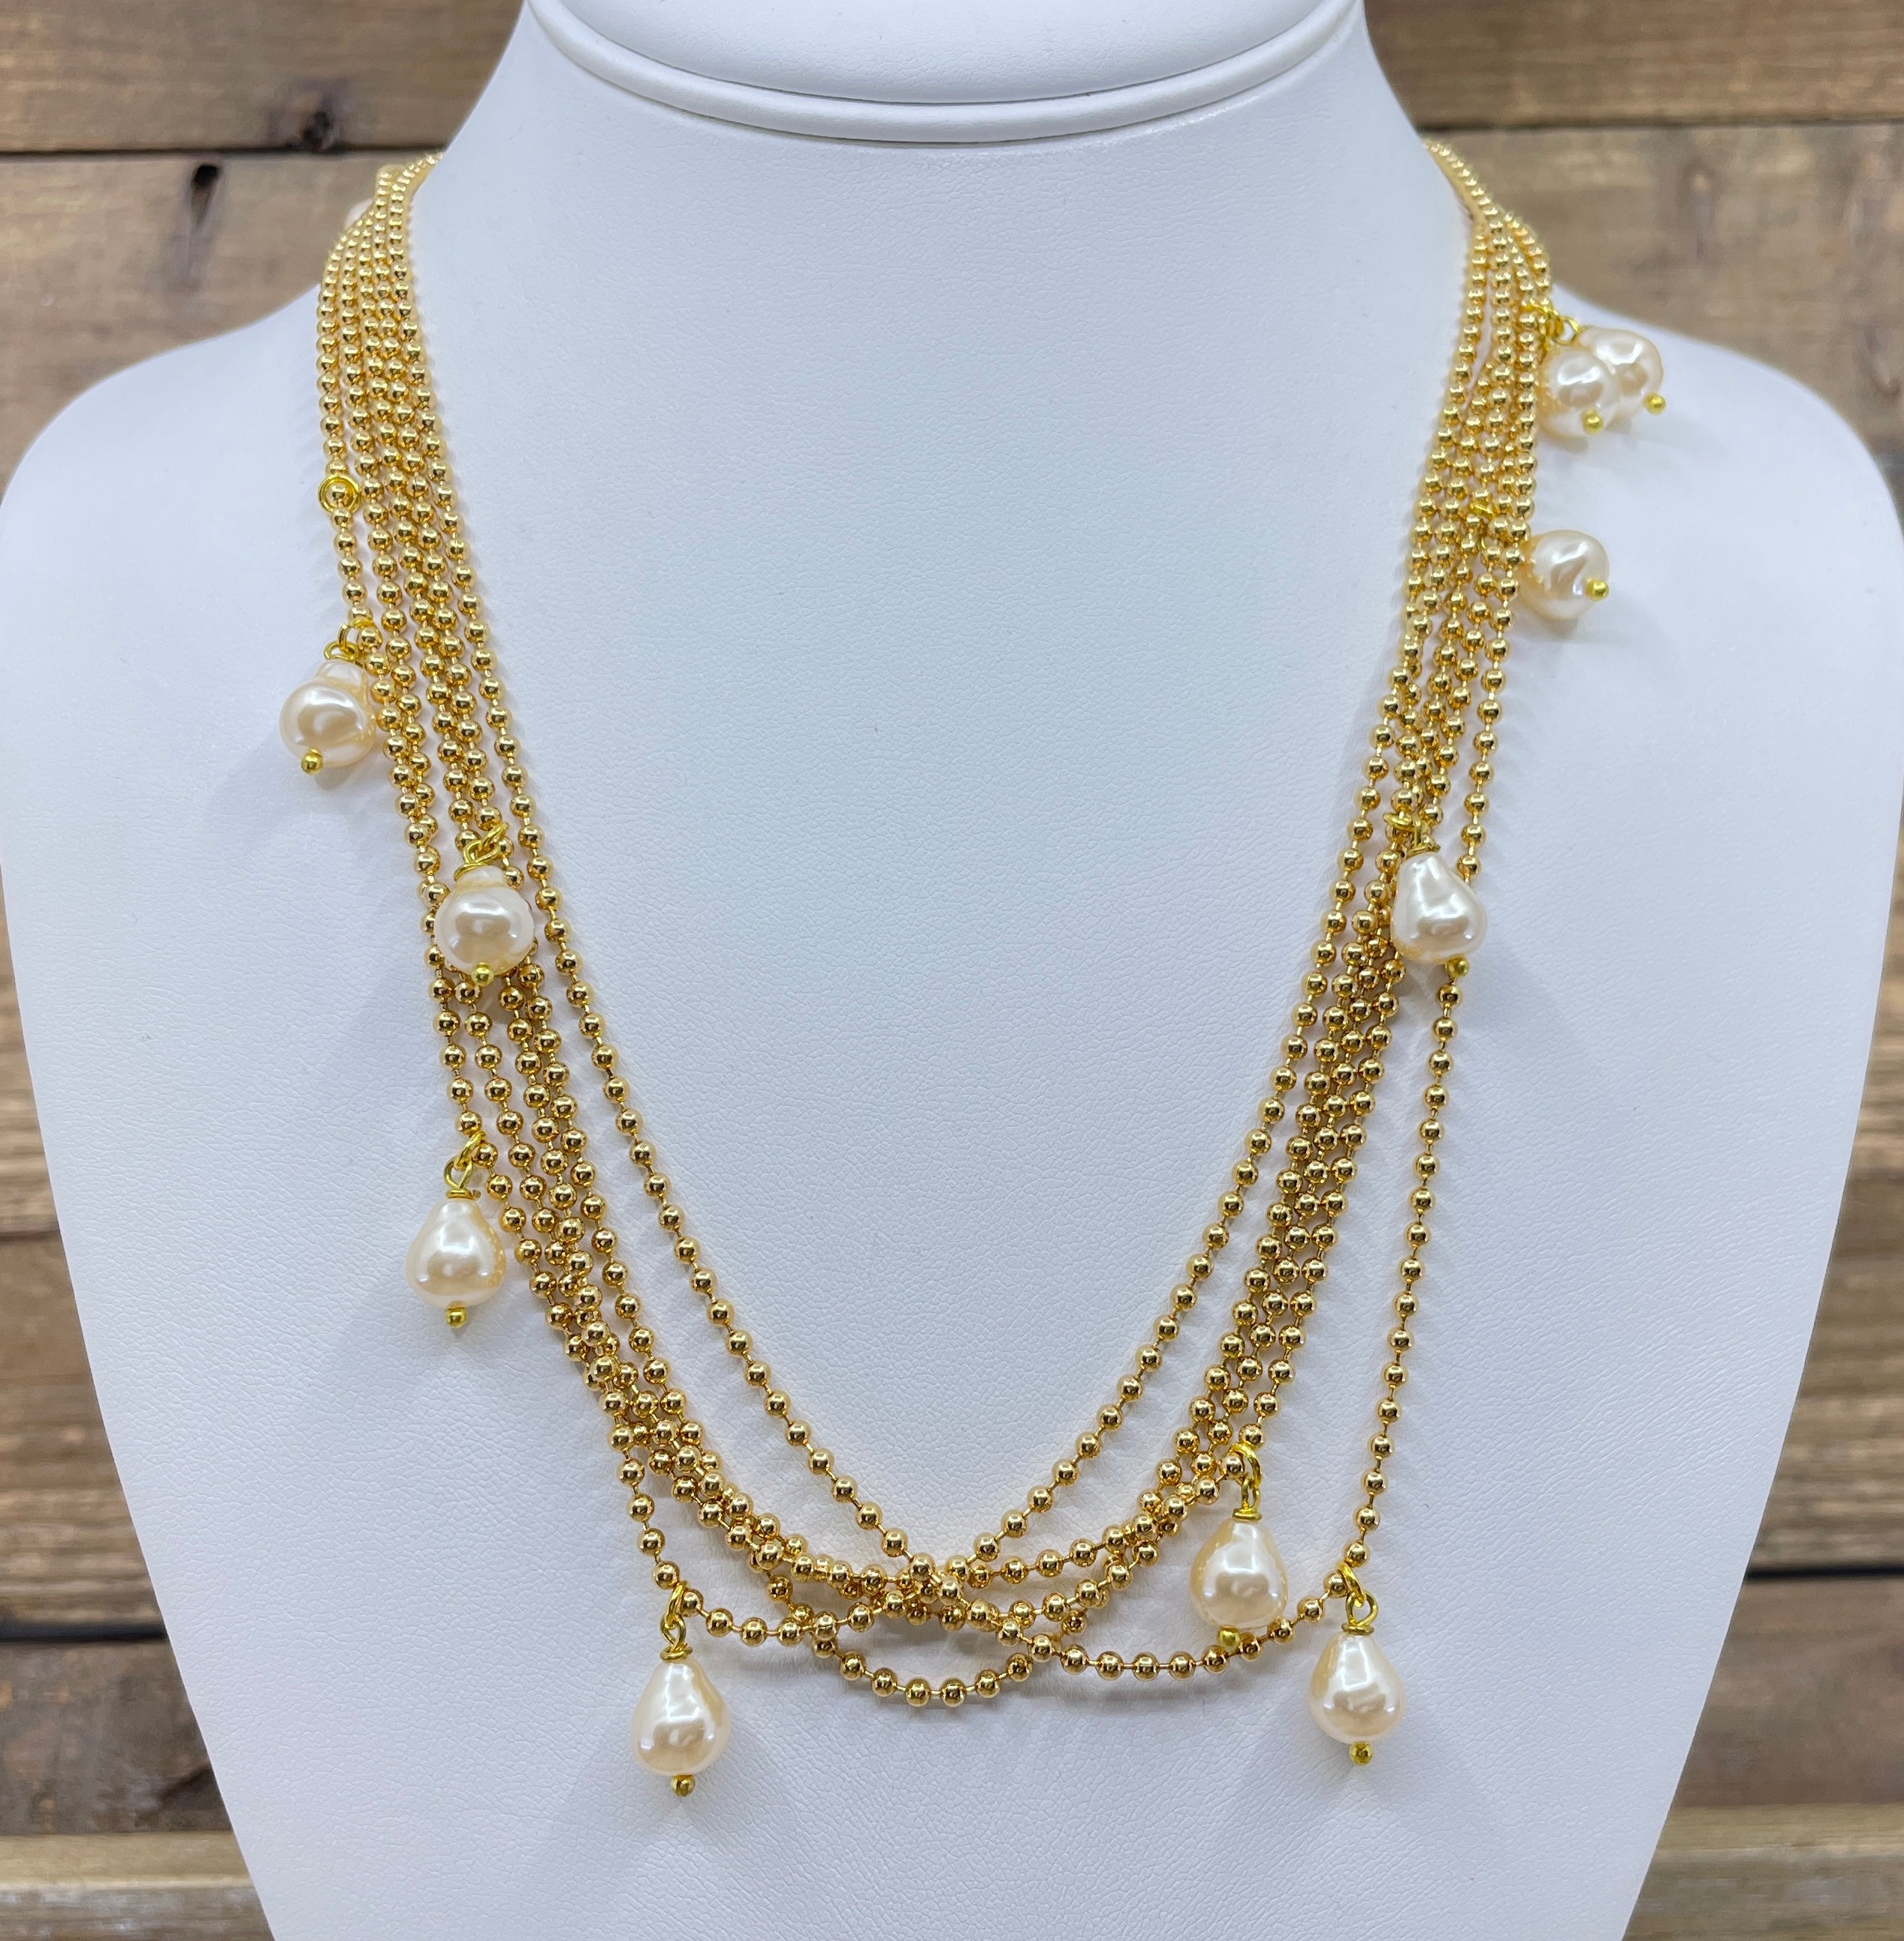 Vintage Gold Plated Chain with Miriam Haskell Pearl Drops